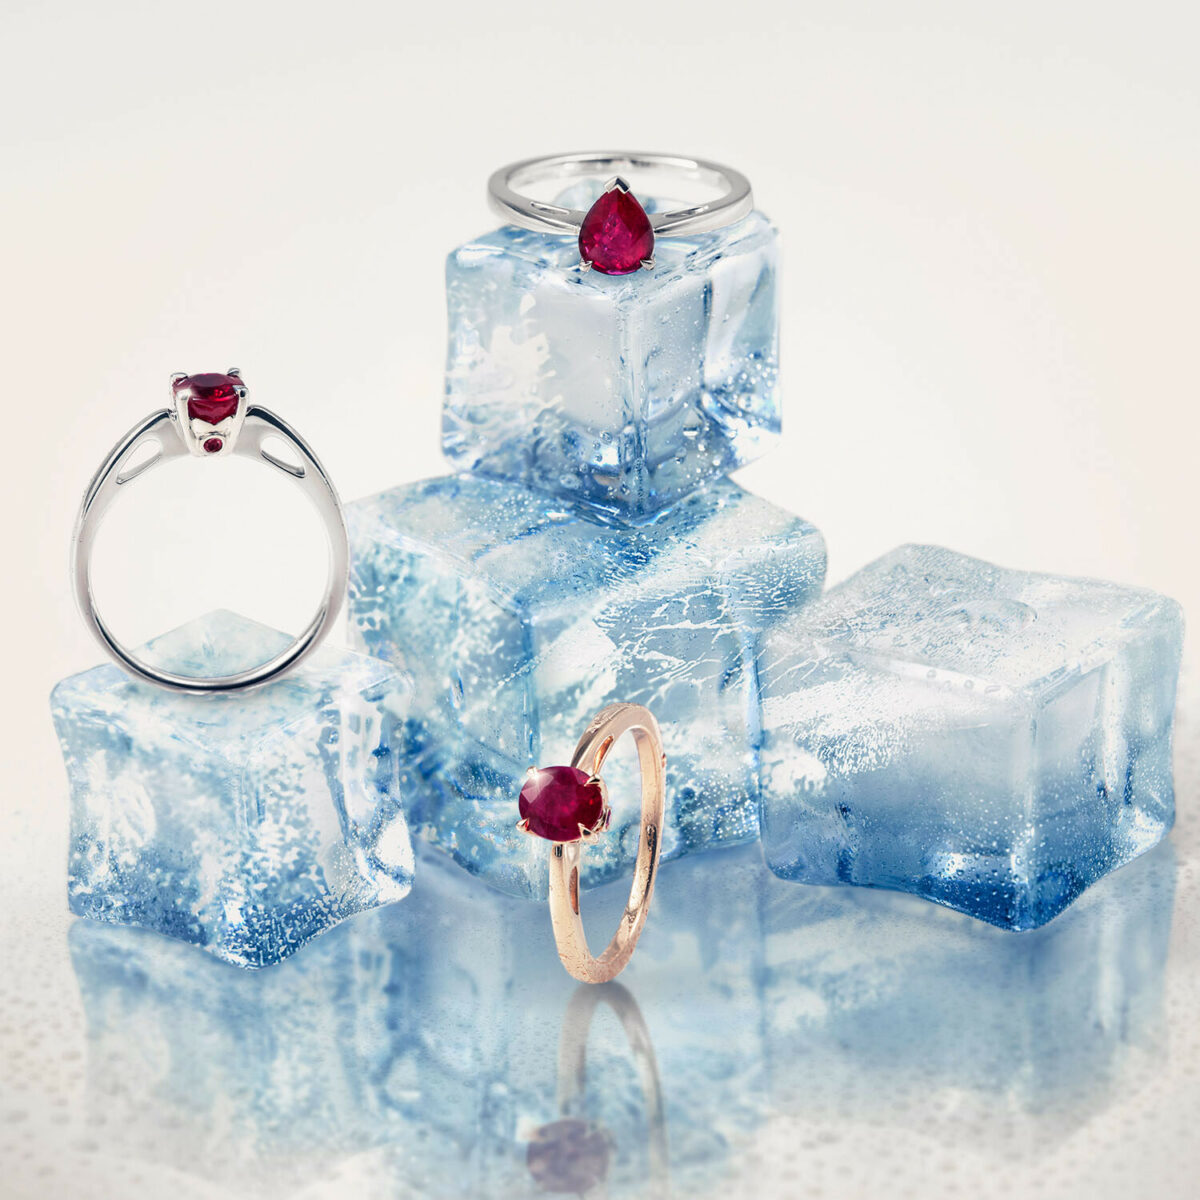 Three ruby rings displayed among ice cubes